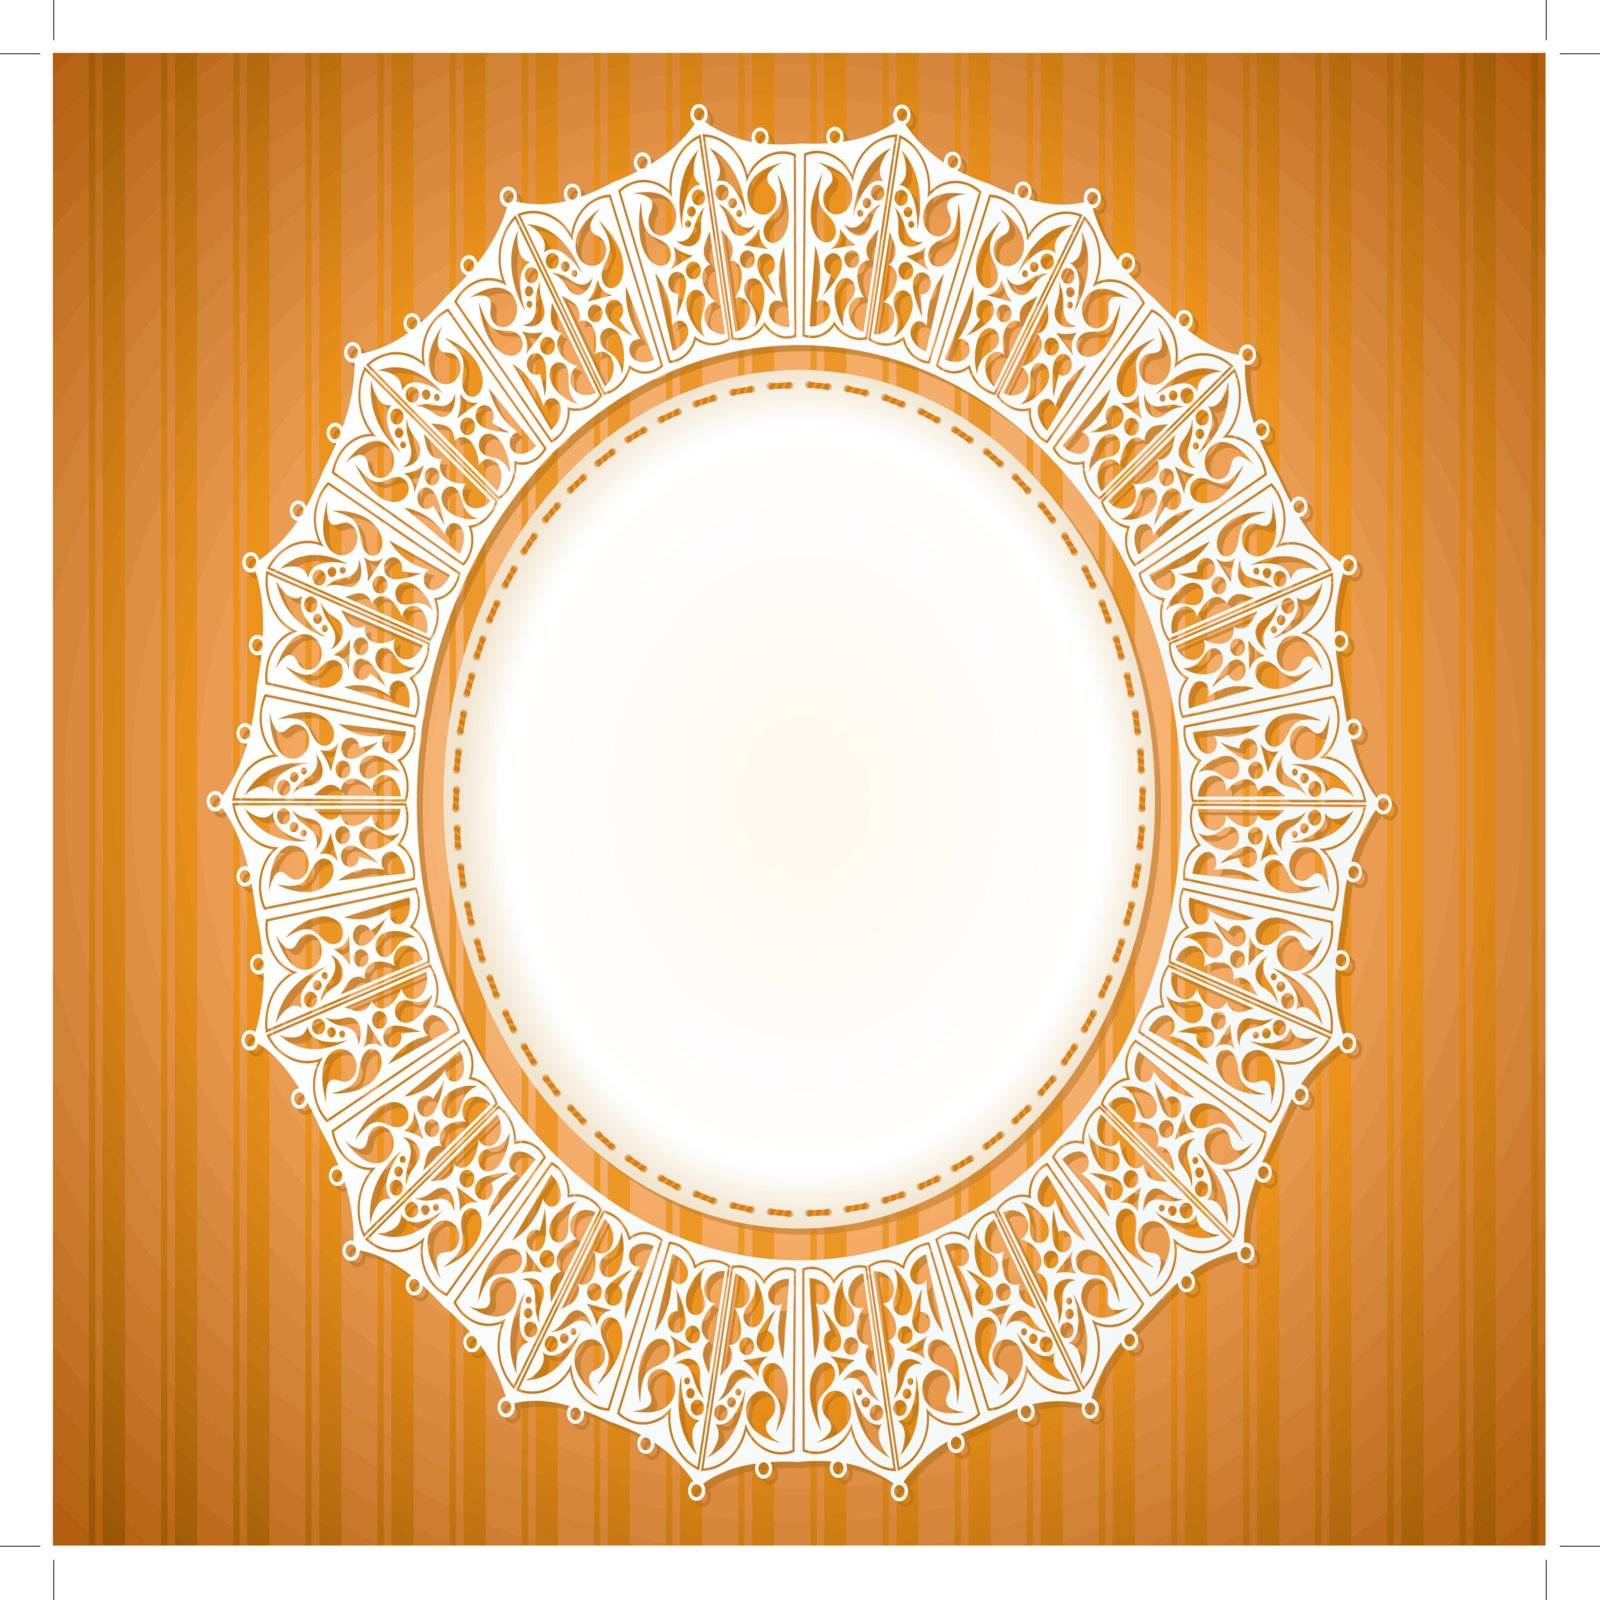 White lace doily on an orange background  by Larser